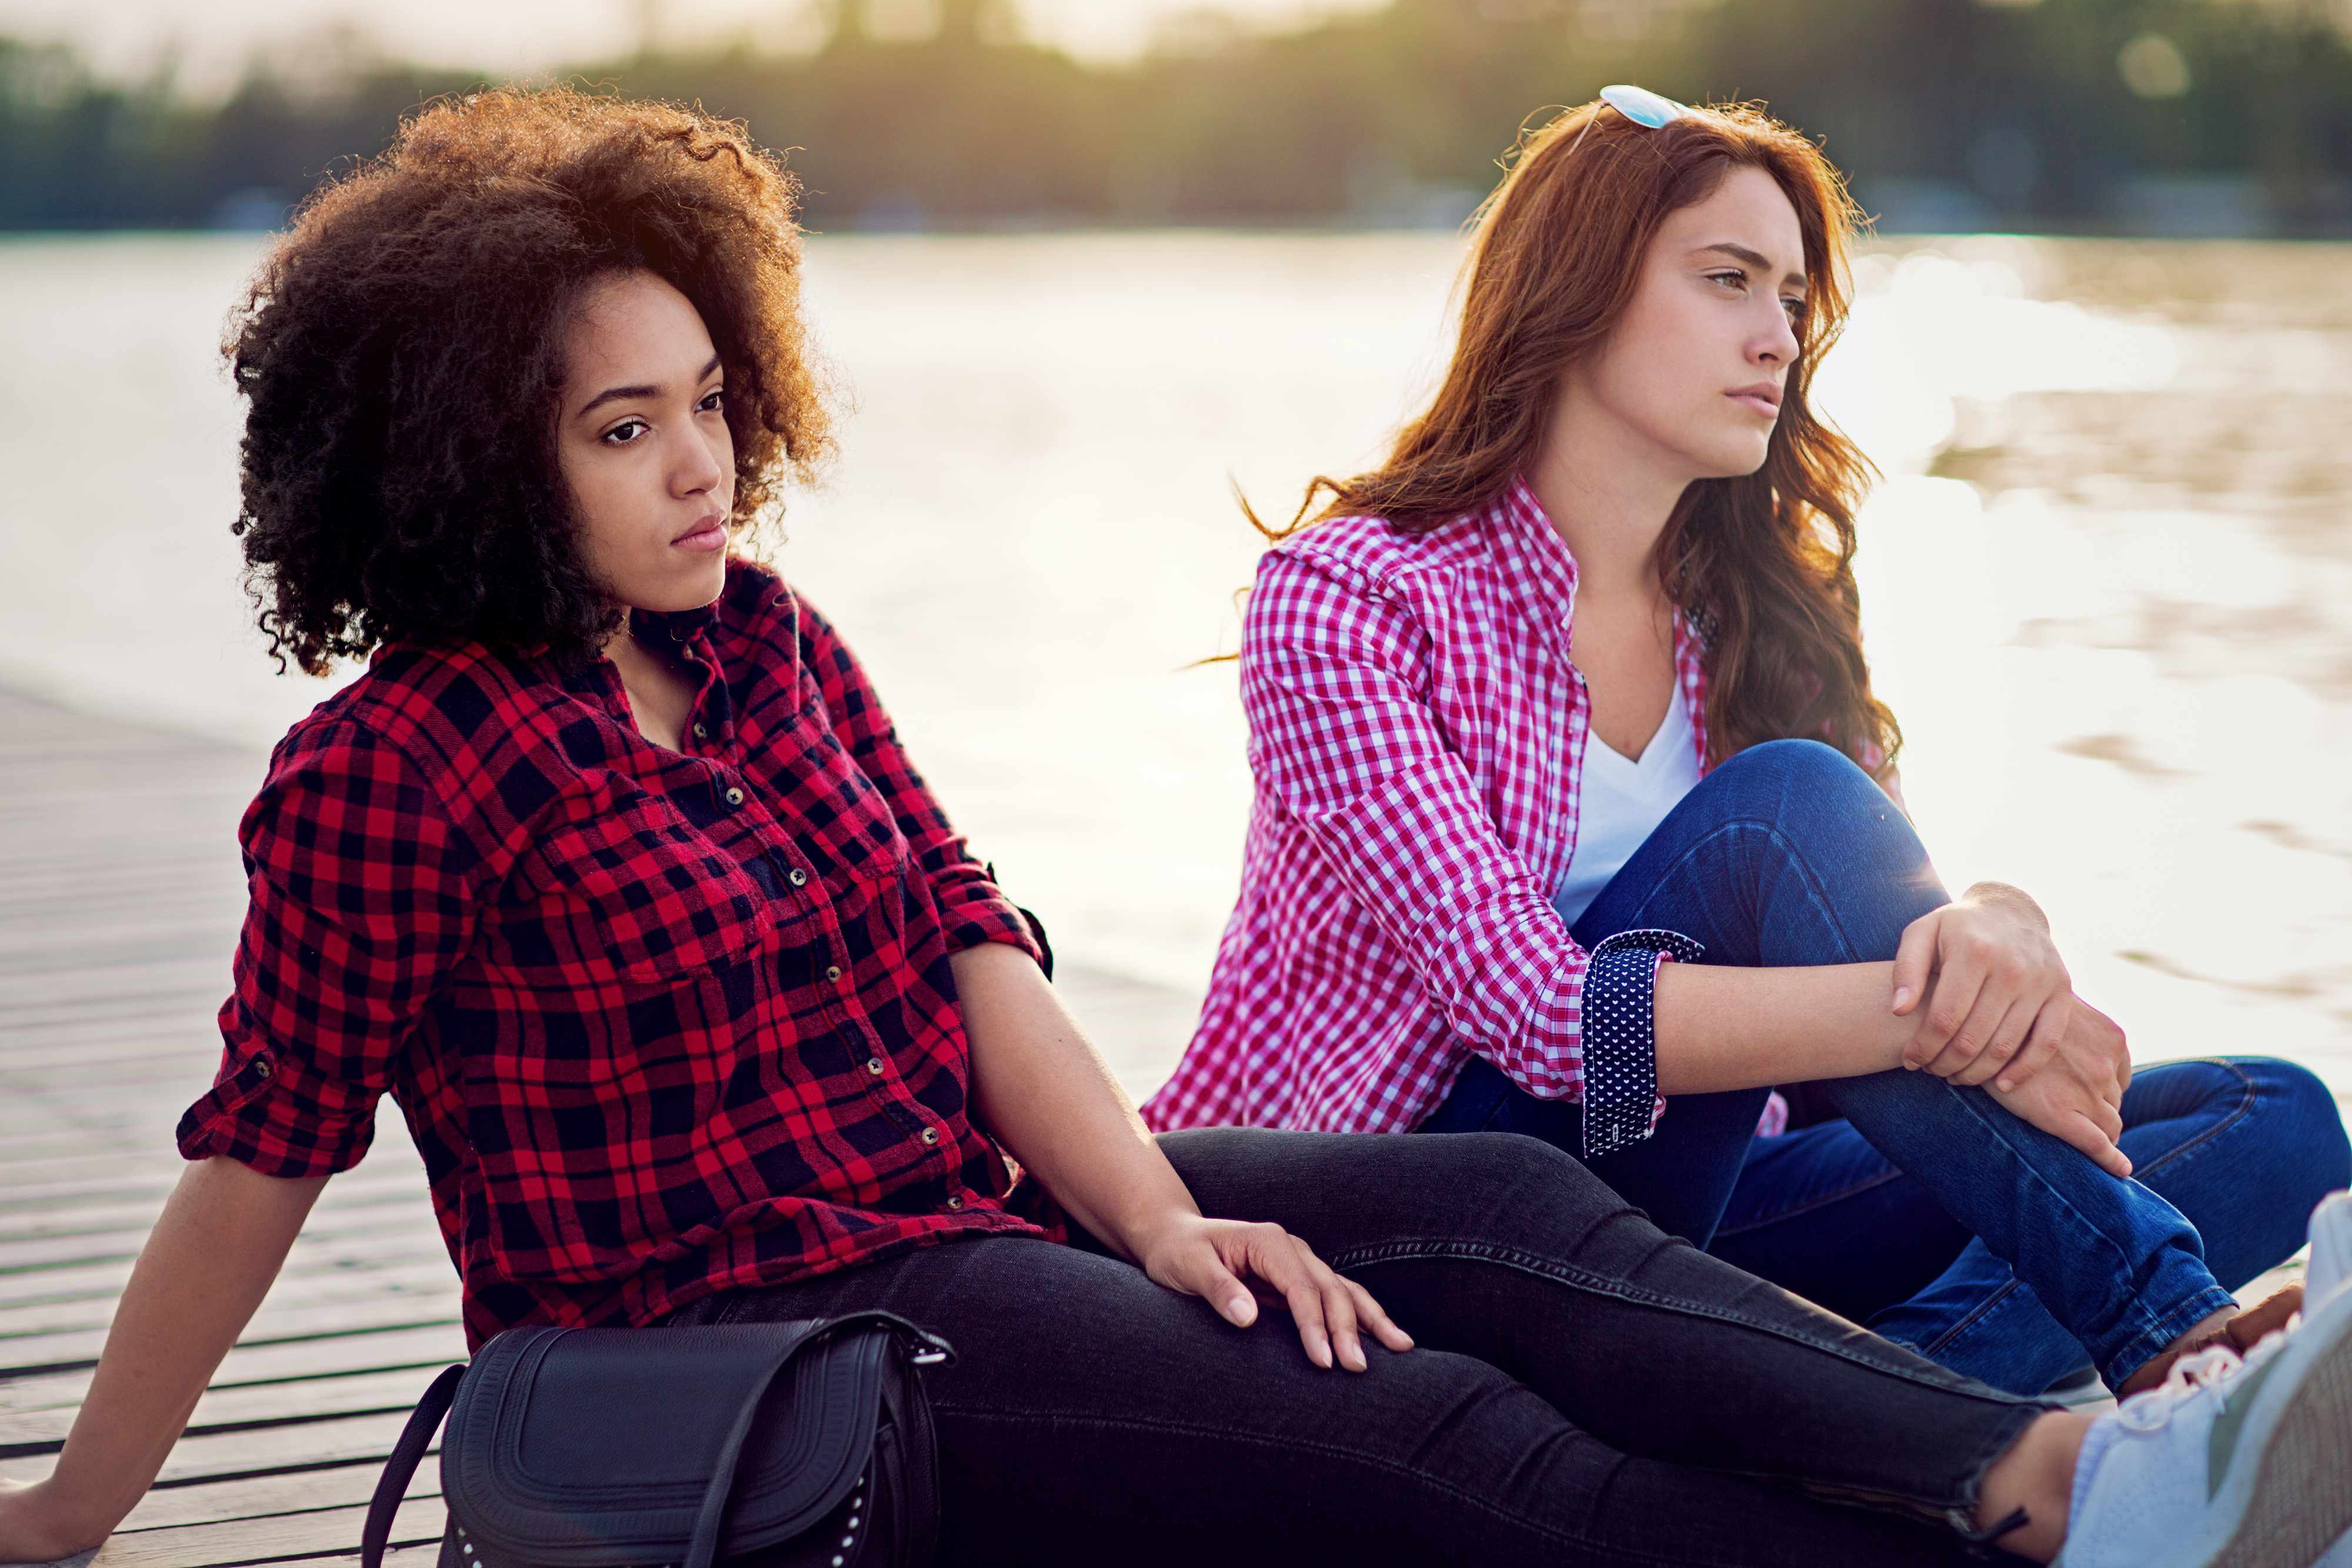 Two women sitting by the water, wearing casual plaid shirts and jeans